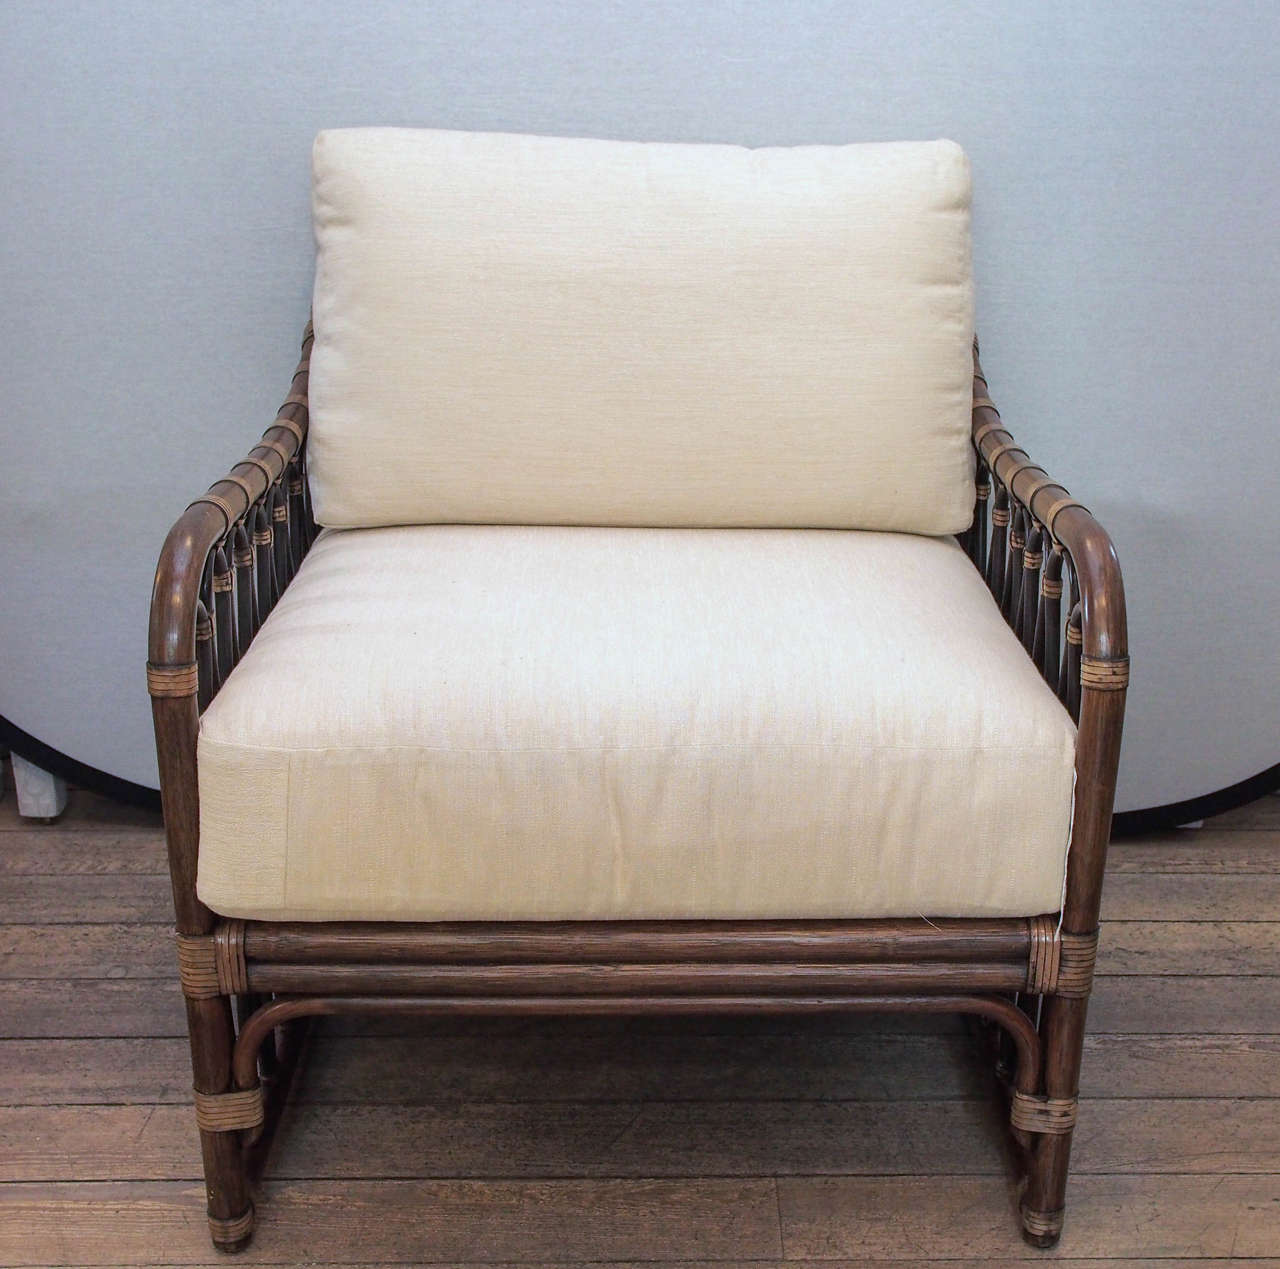 Graceful free-flowing décor, inspired by vintage colonial styling, fills the arm and back panels of the generously proportioned sona lounge chair. Leather wrapped rattan pole with cushioned seat and back. COM or custom fabric available upon request.